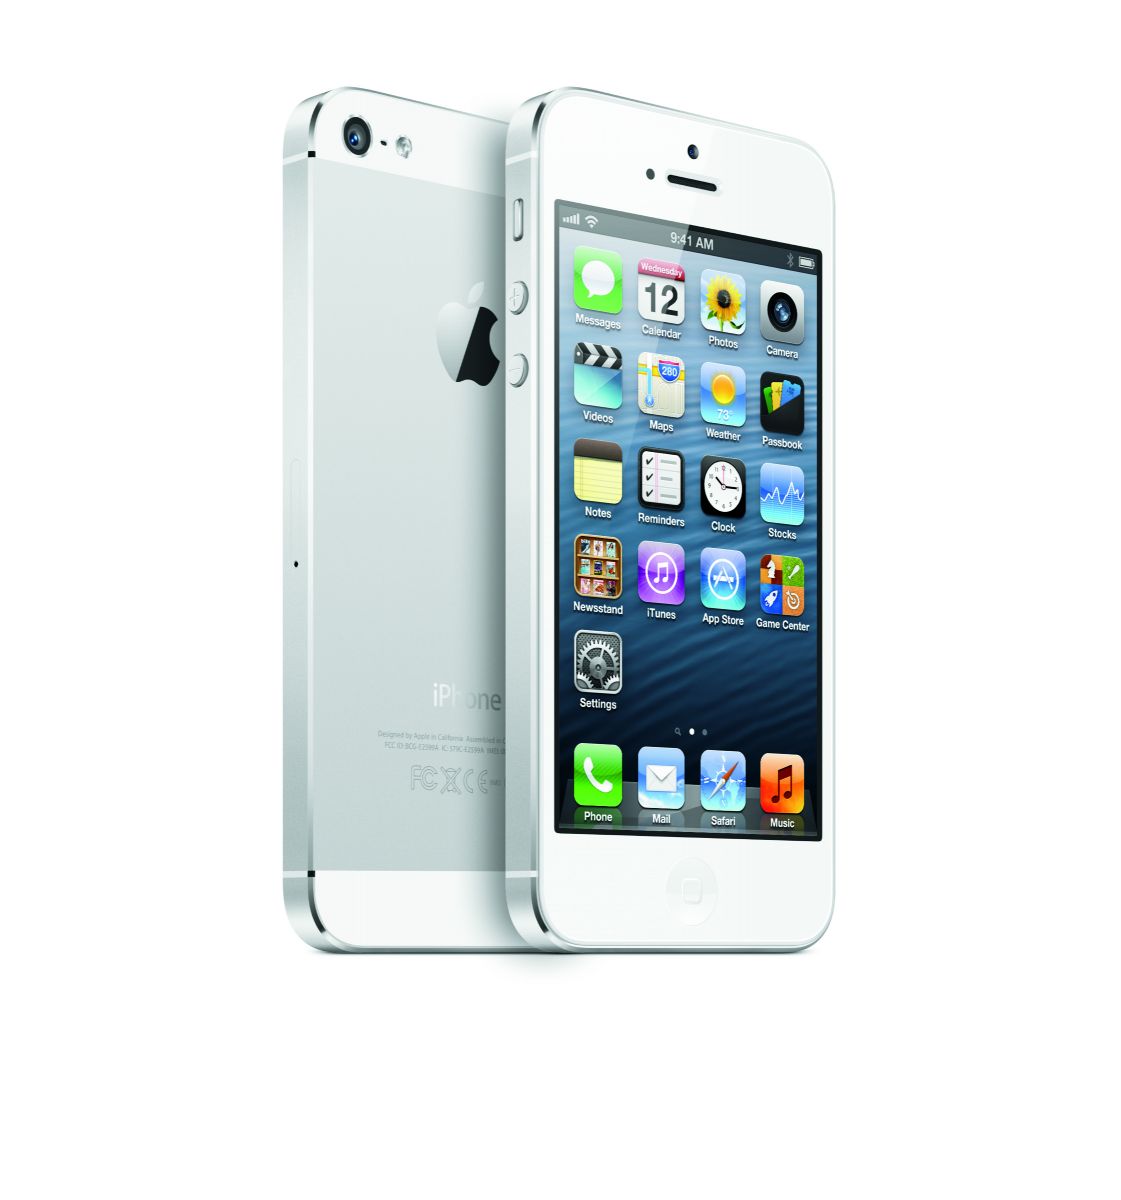 As Apple takes center stage, iPhone 5 is evolutionary, not revolutionary 